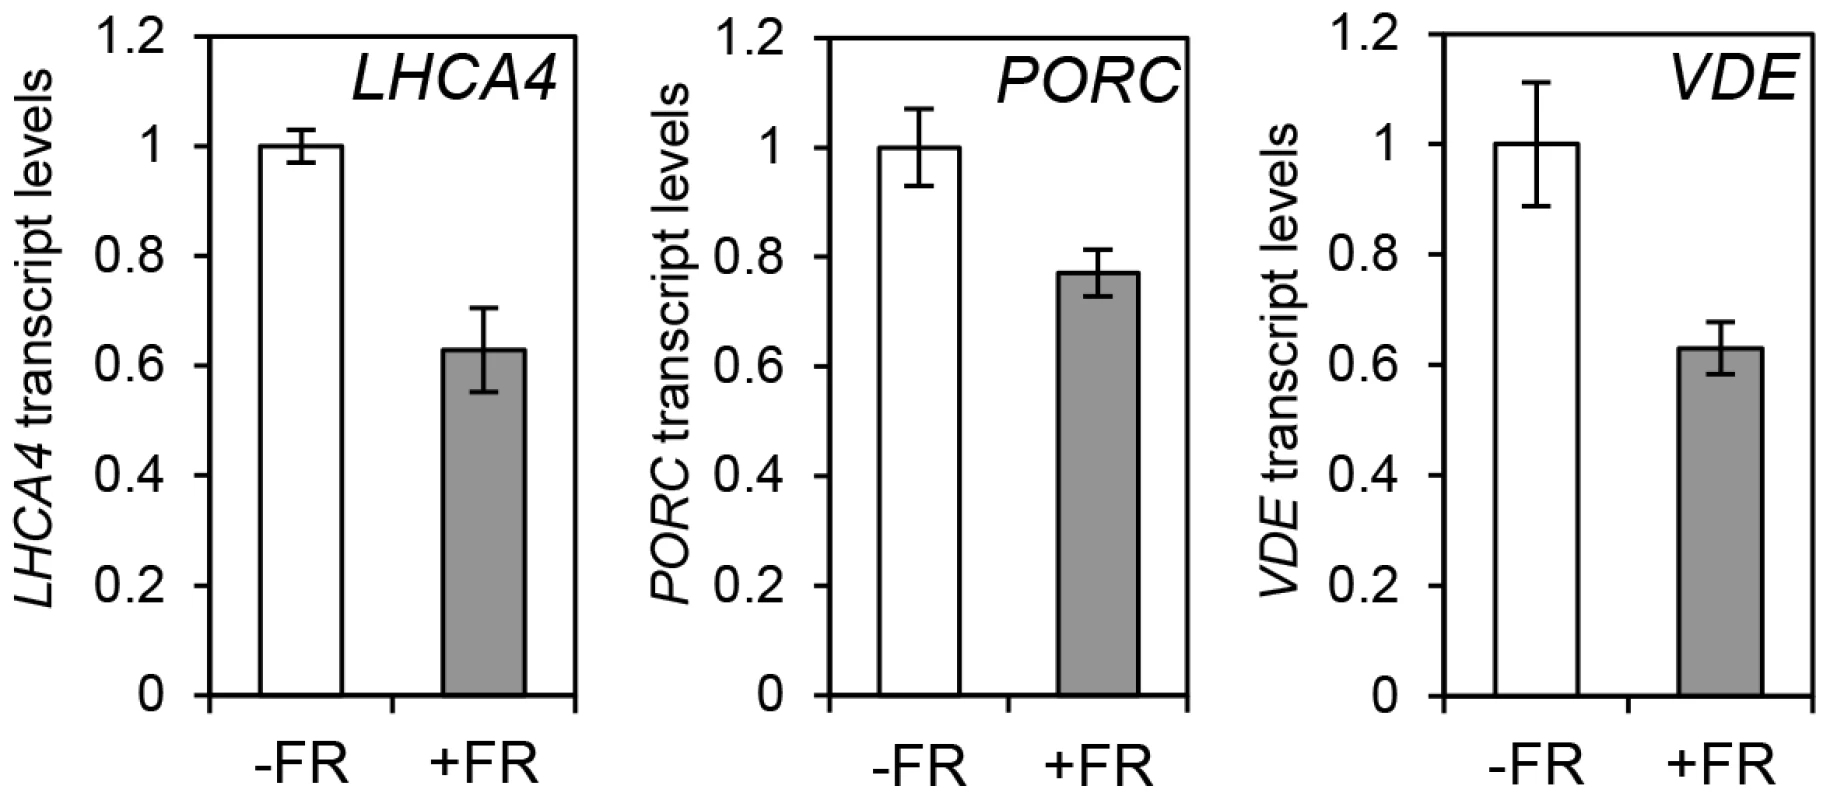 Photopigment gene expression response to an End of Day (EOD)-Far Red (FR) light treatment in Col-0.